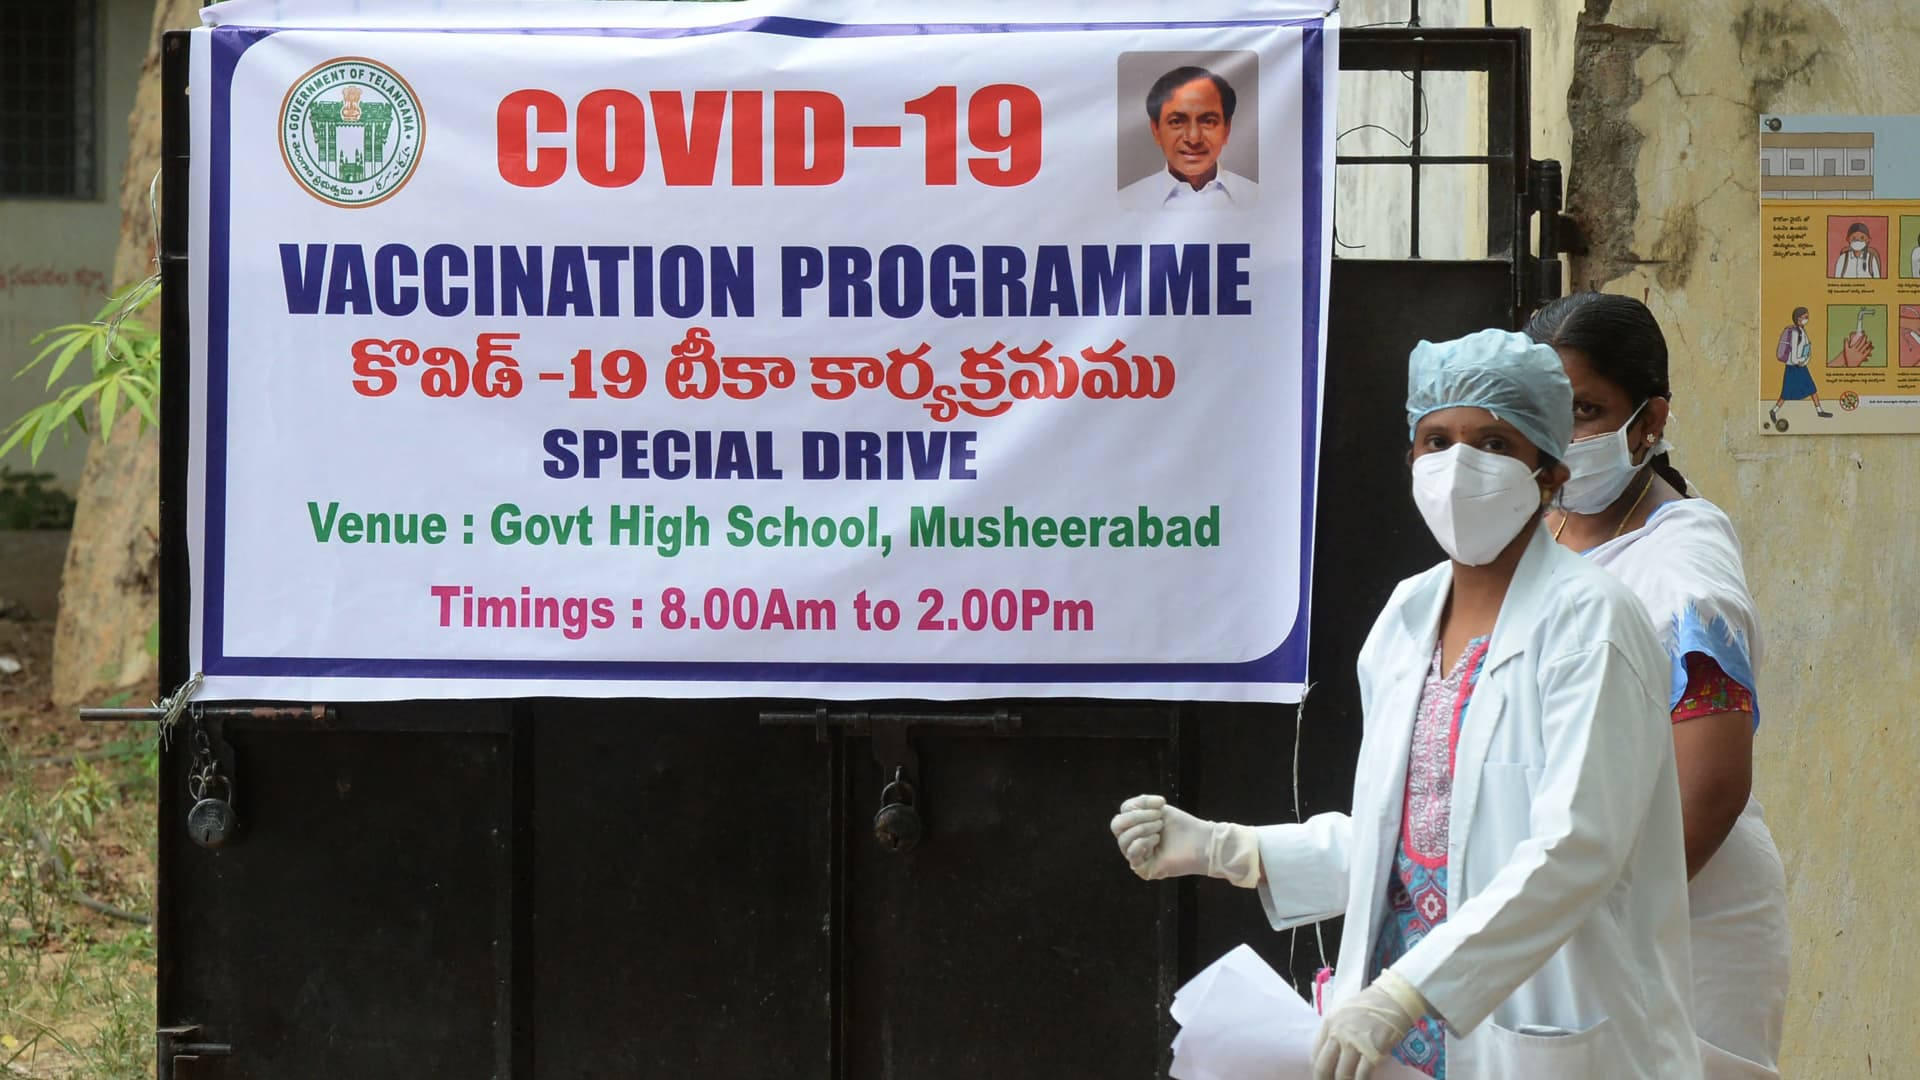 A doctor walks past the banner announcing a Covid-19 vaccination drive in Hyderabad, India on May 28, 2021.